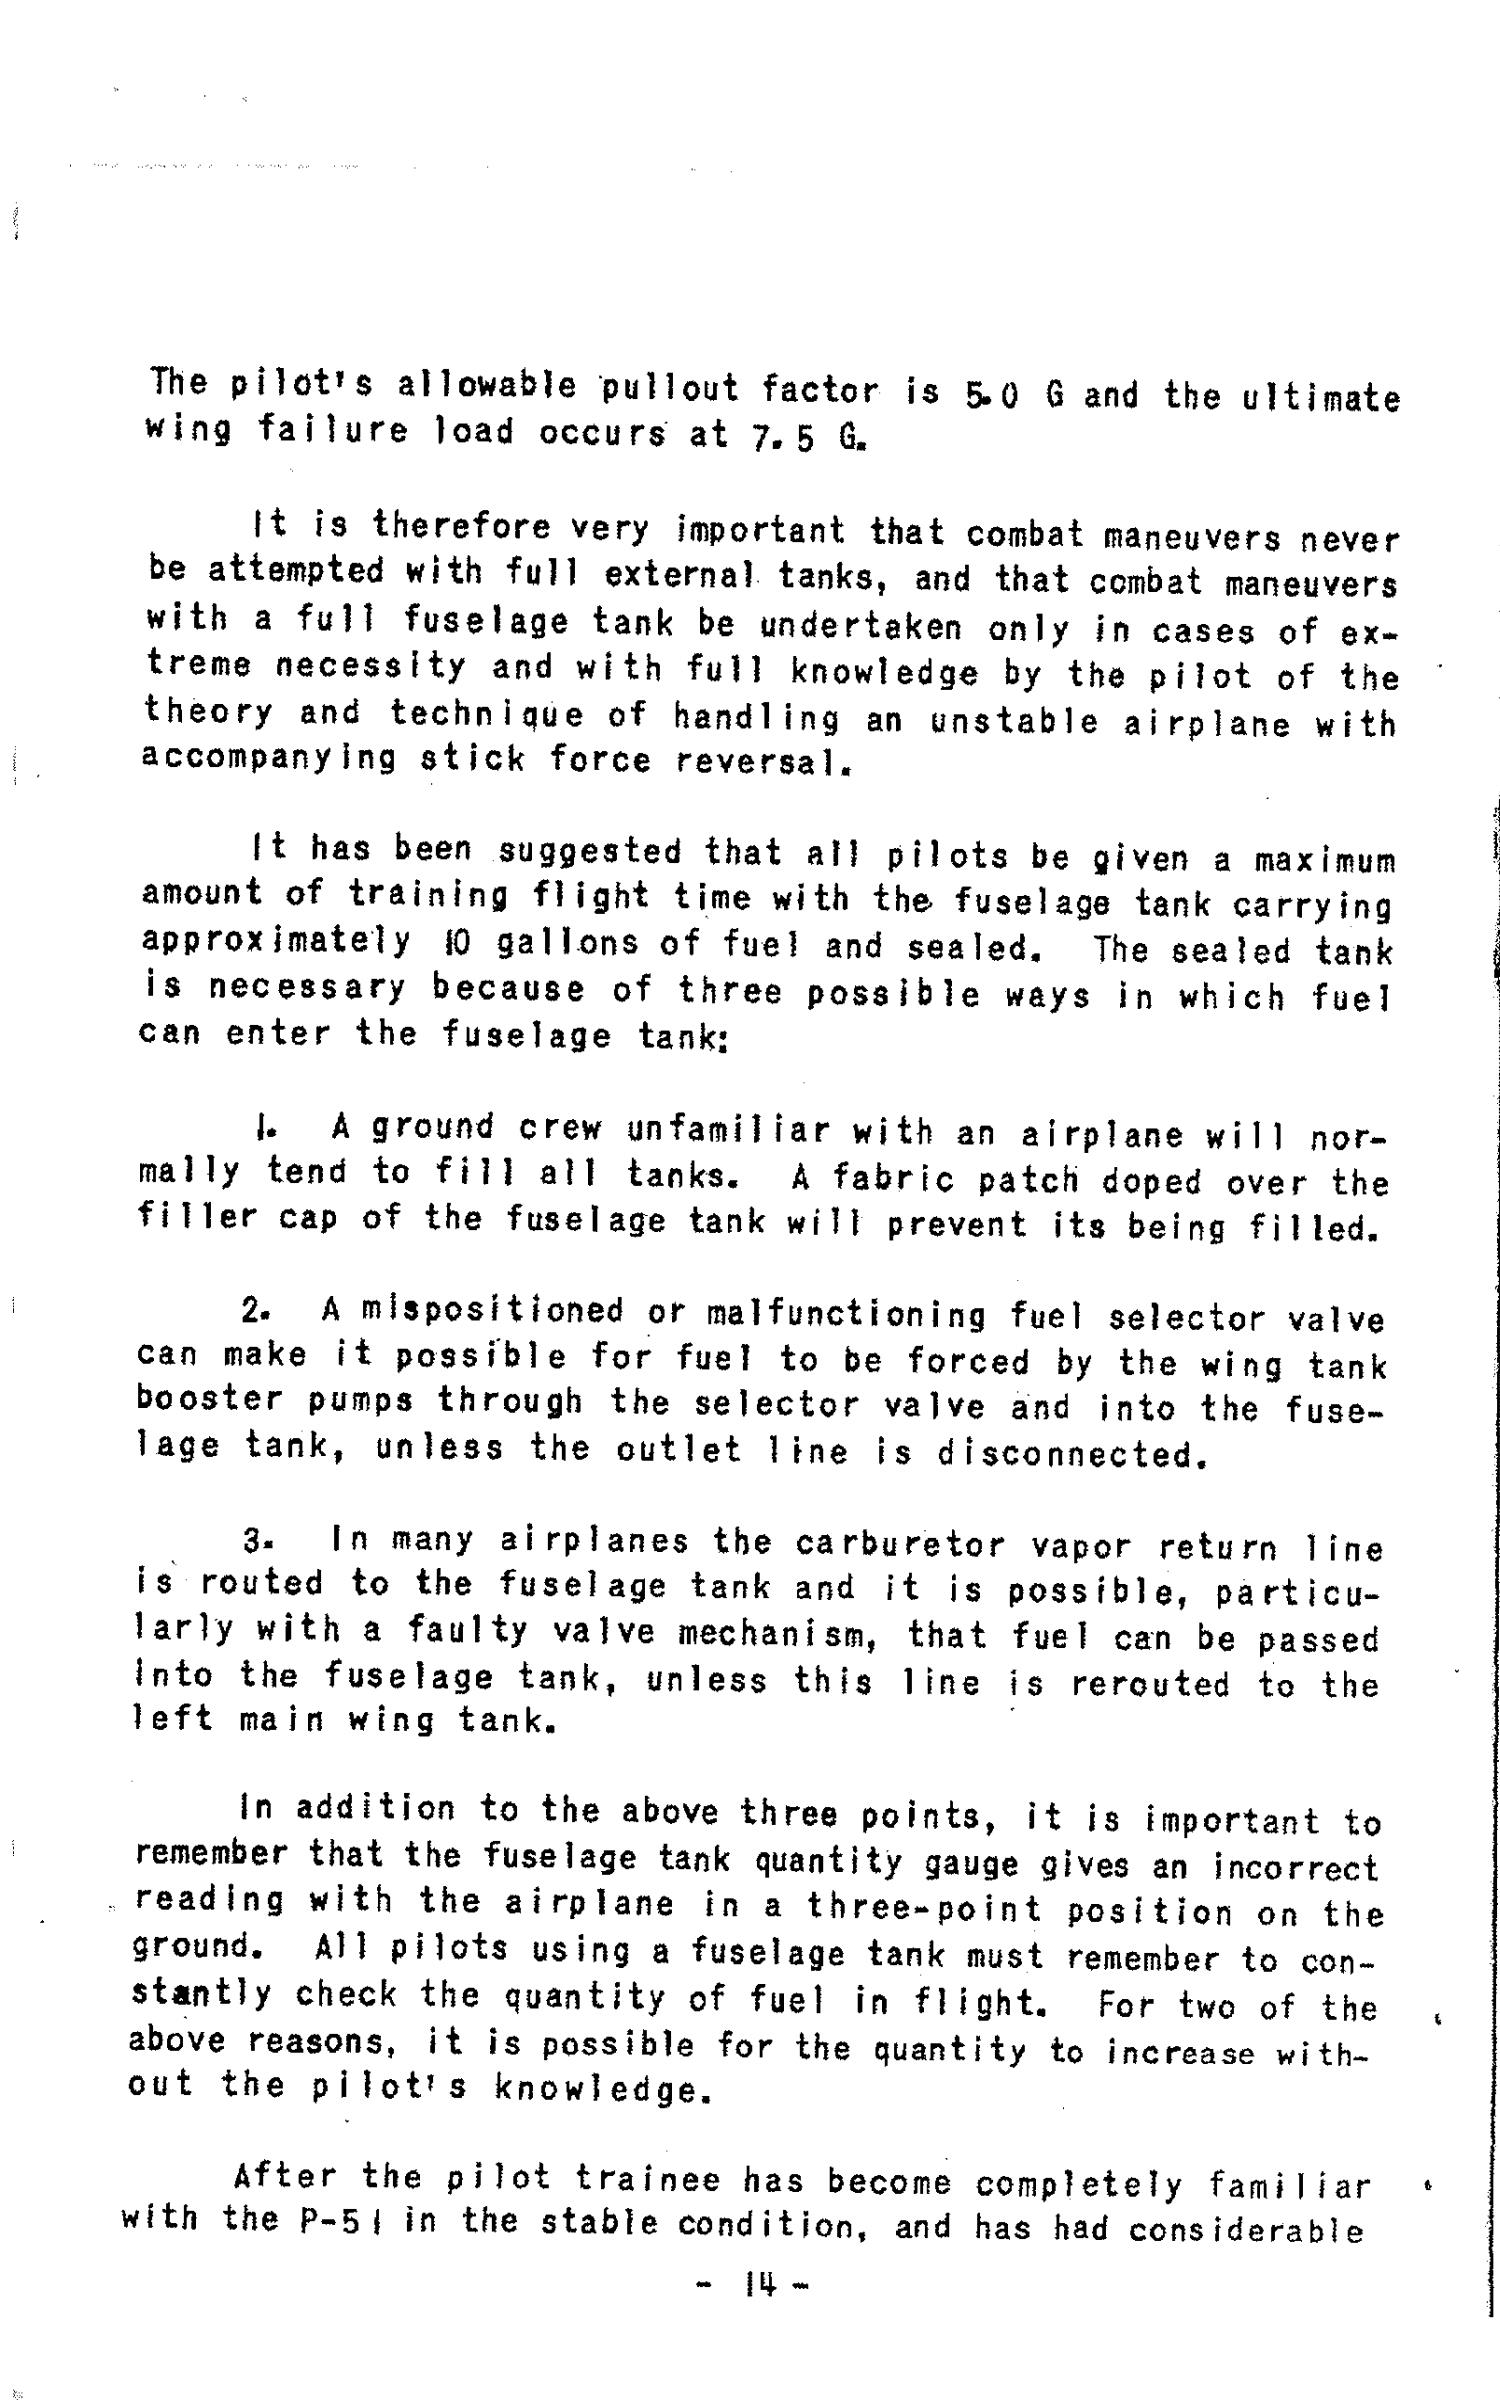 Sample page 16 from AirCorps Library document: Briefing for P-51 Pilot Instructors